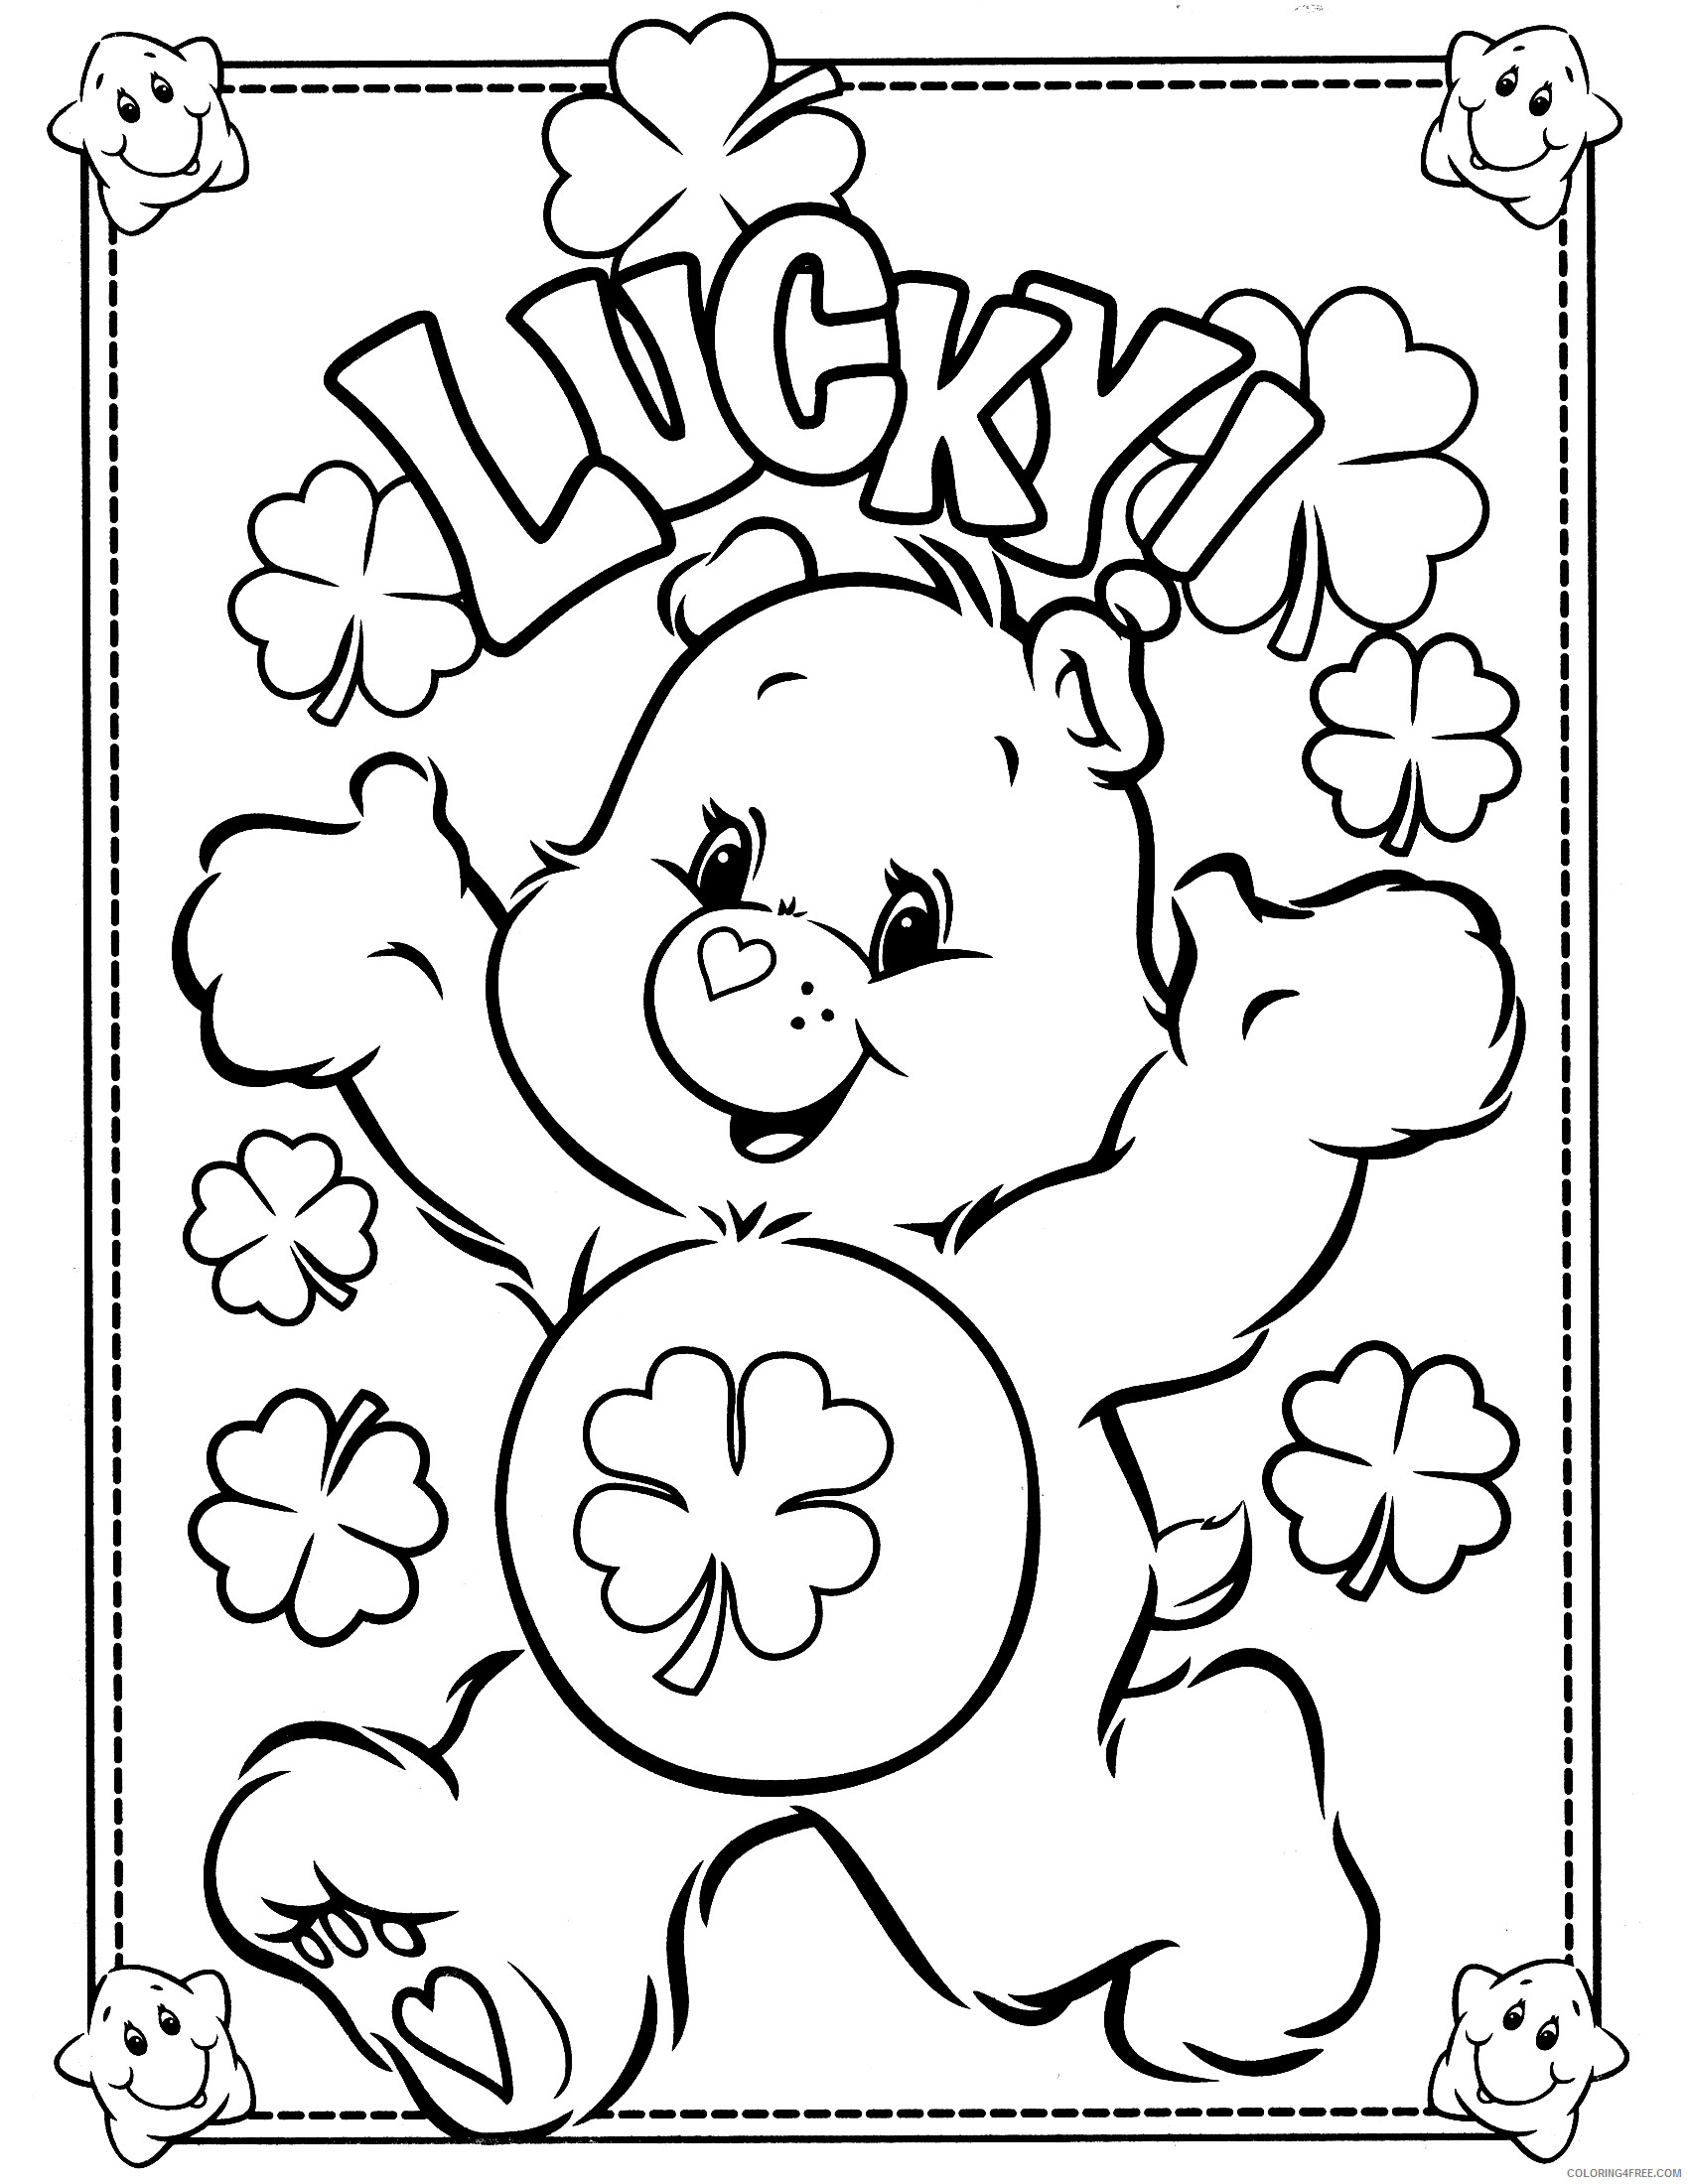 Care Bears Coloring Pages Cartoons Care Bear Printable 2020 1577 Coloring4free